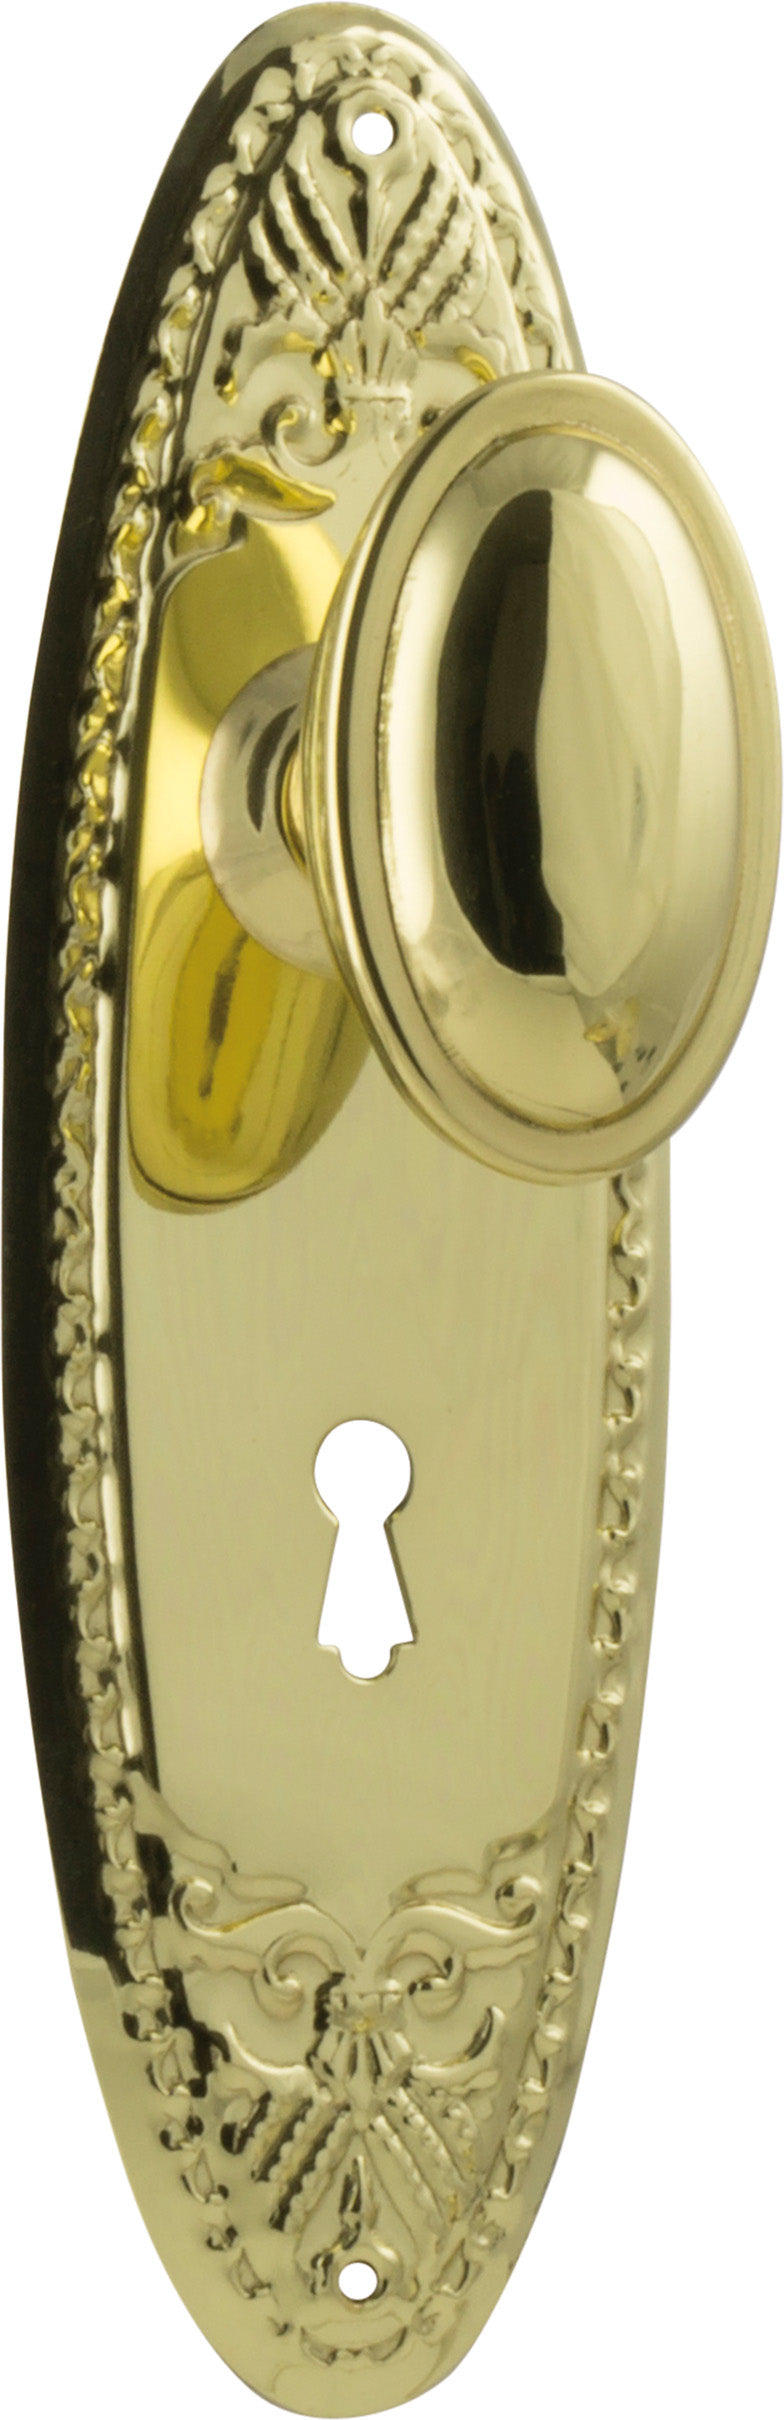 Fitzroy Door Knob - Long Backplate by Tradco